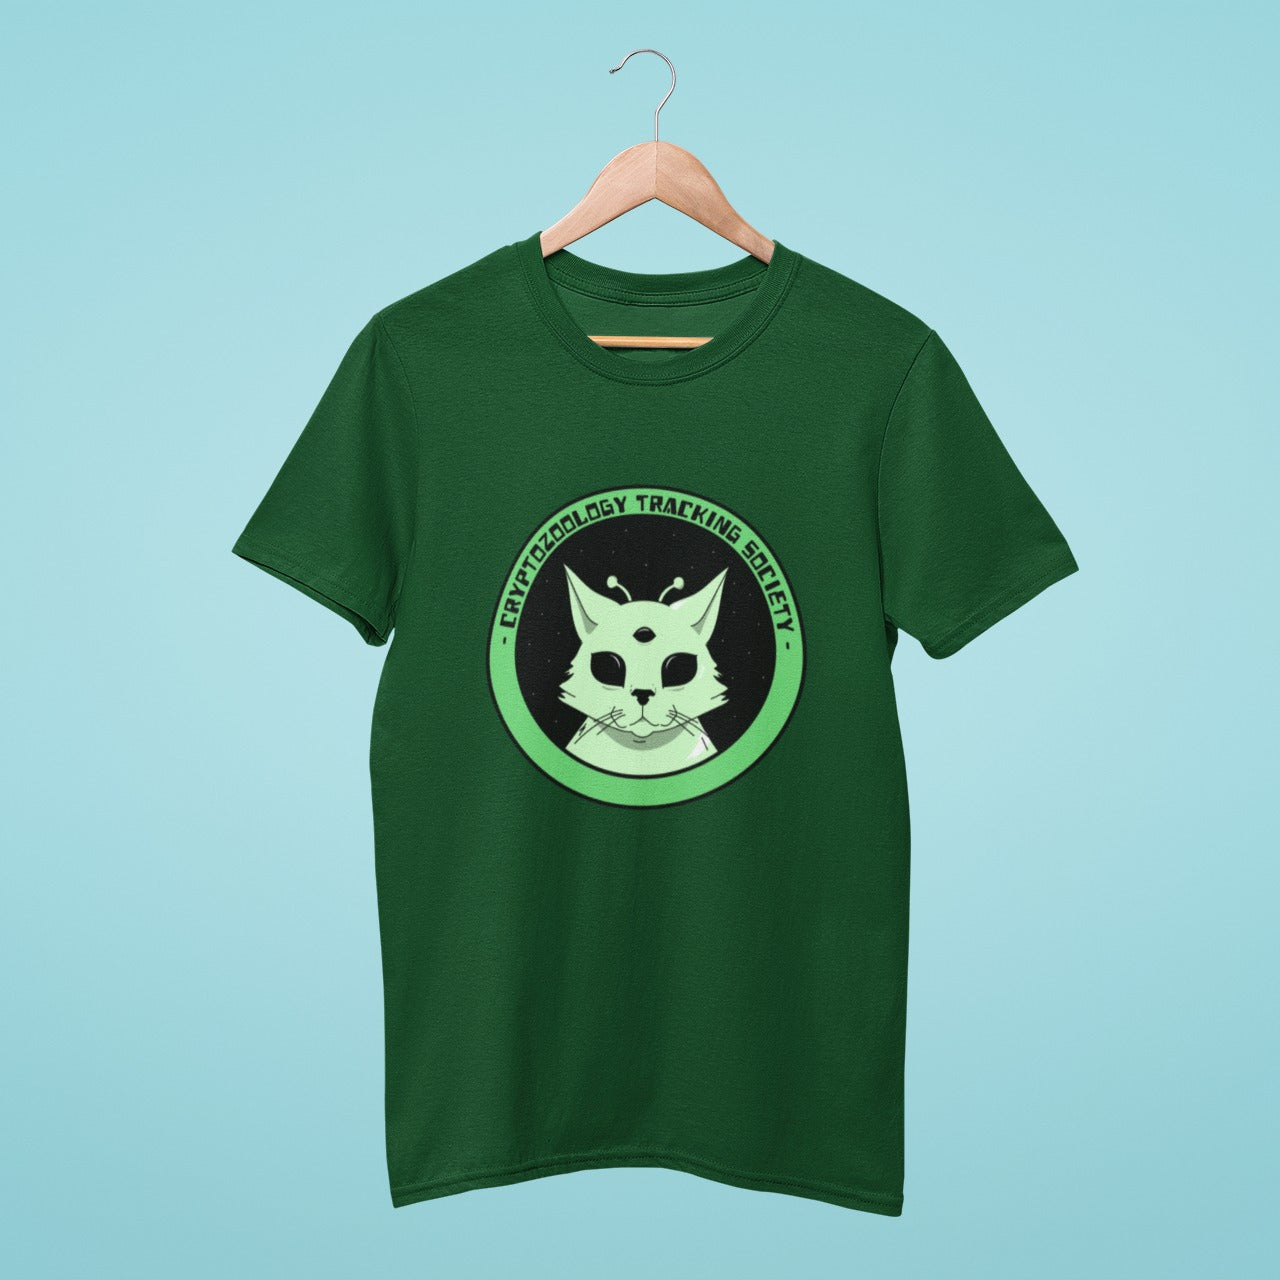 Add some intergalactic charm to your wardrobe with our green t-shirt featuring an alien-like cat and the title "Cryptozoology Tracking Society". Perfect for sci-fi and cryptozoology enthusiasts who also love playful fashion. Made from high-quality materials, this comfortable and durable t-shirt is a must-have. Order now and show off your quirky style!